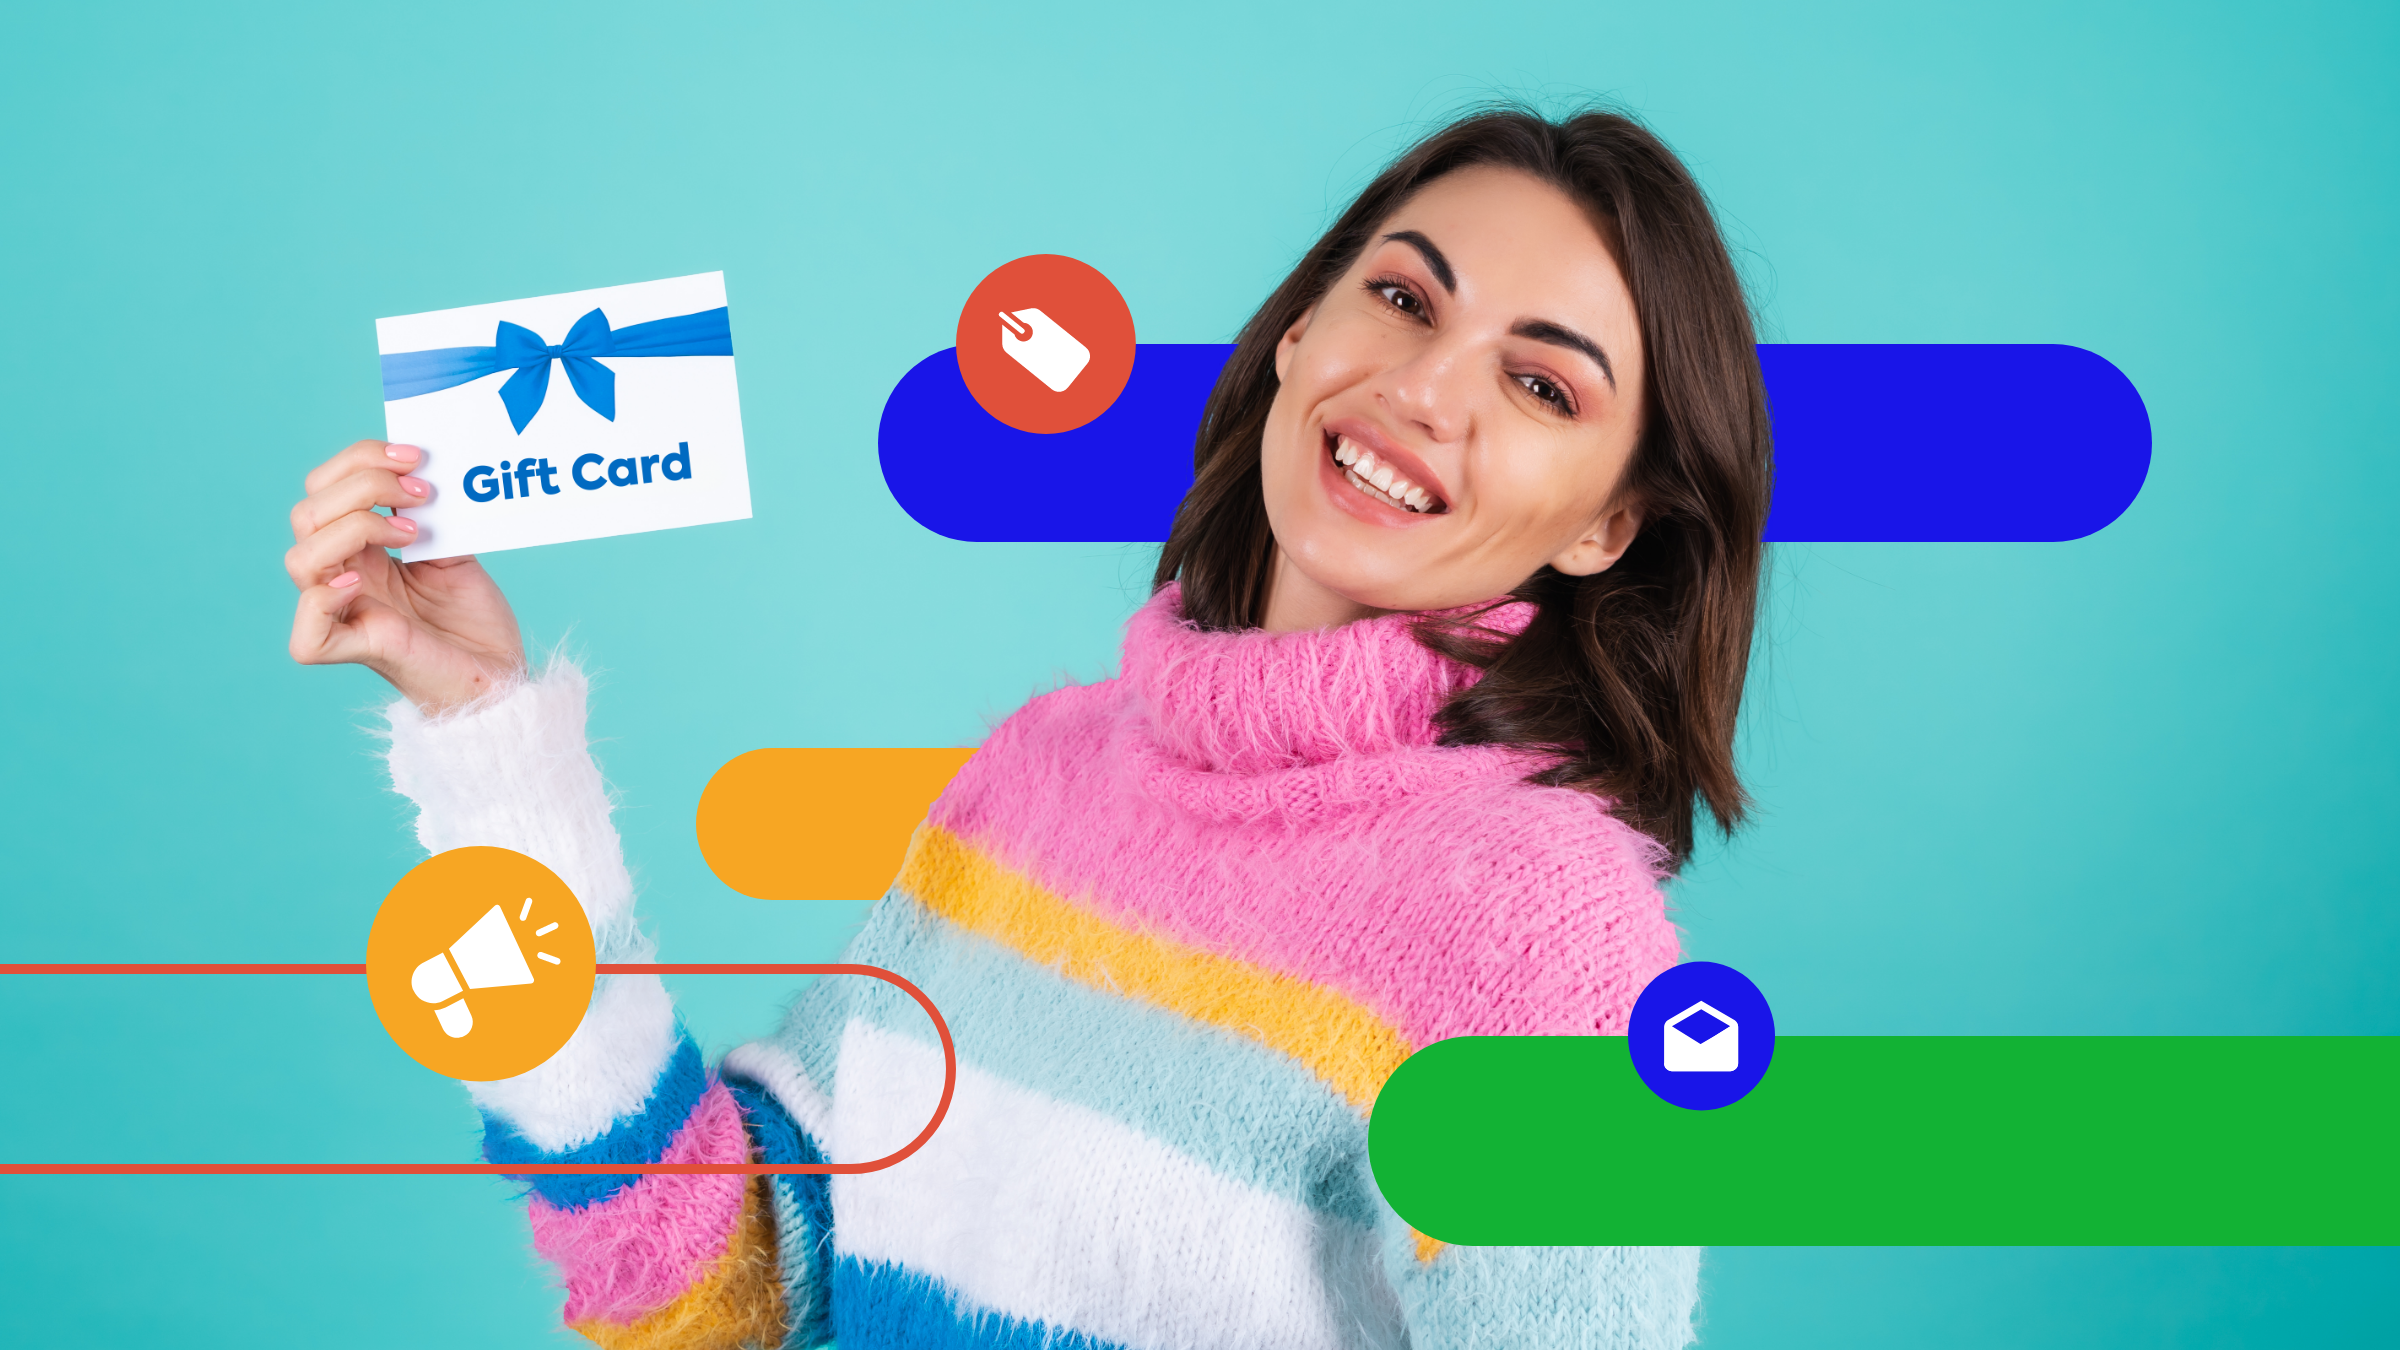 6 Reasons Why Gift Cards Will Take Your Sales to the Next Level